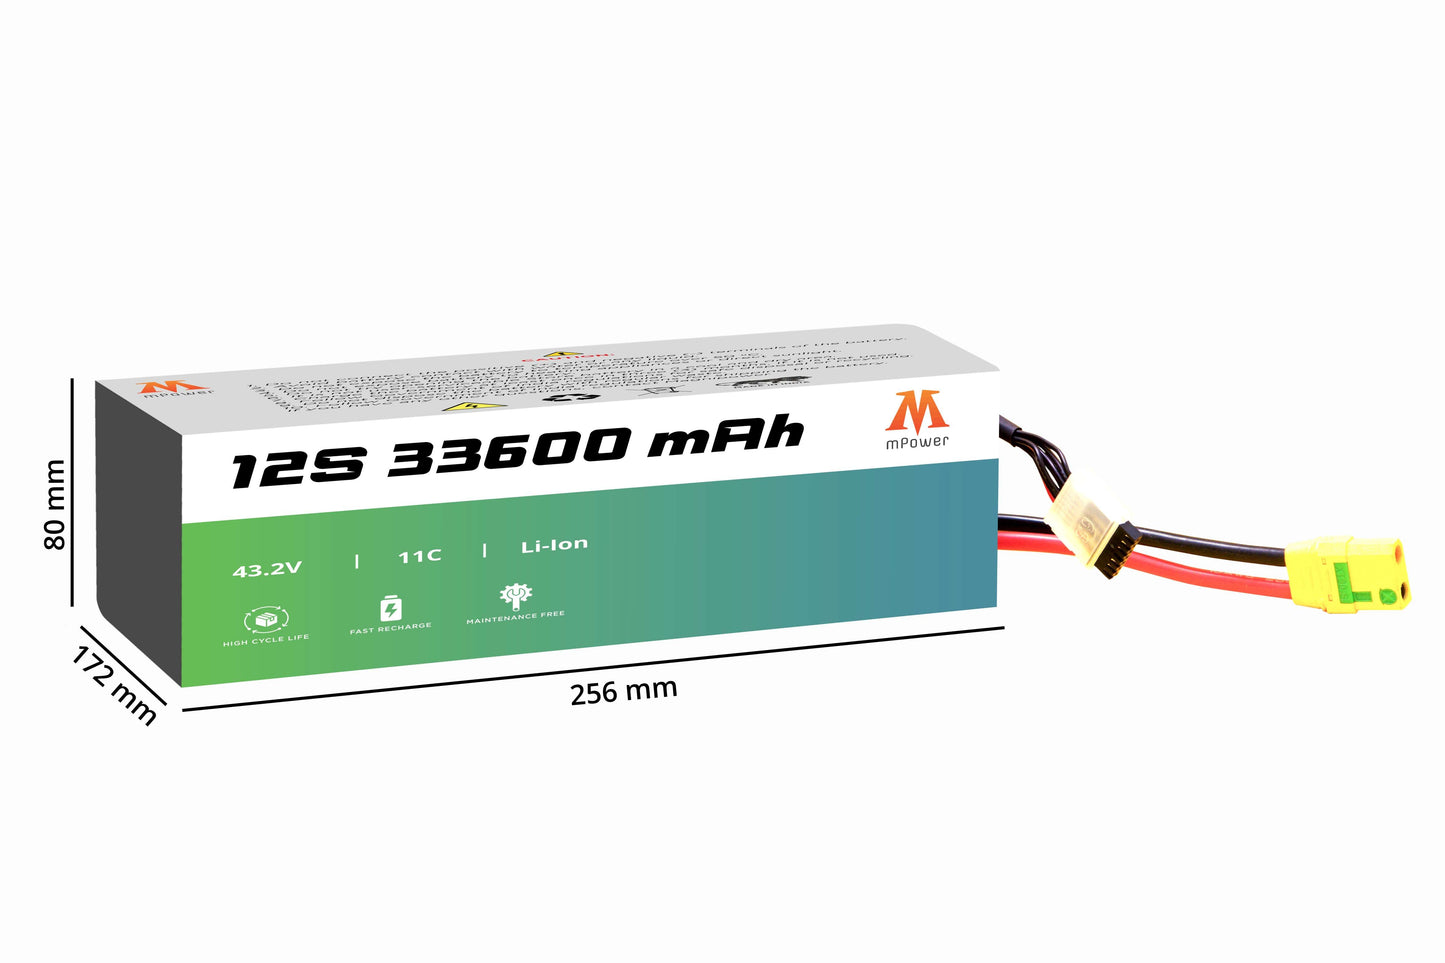 mPower 12S 33600mAh Lithium-Ion Battery for Delivery Drones